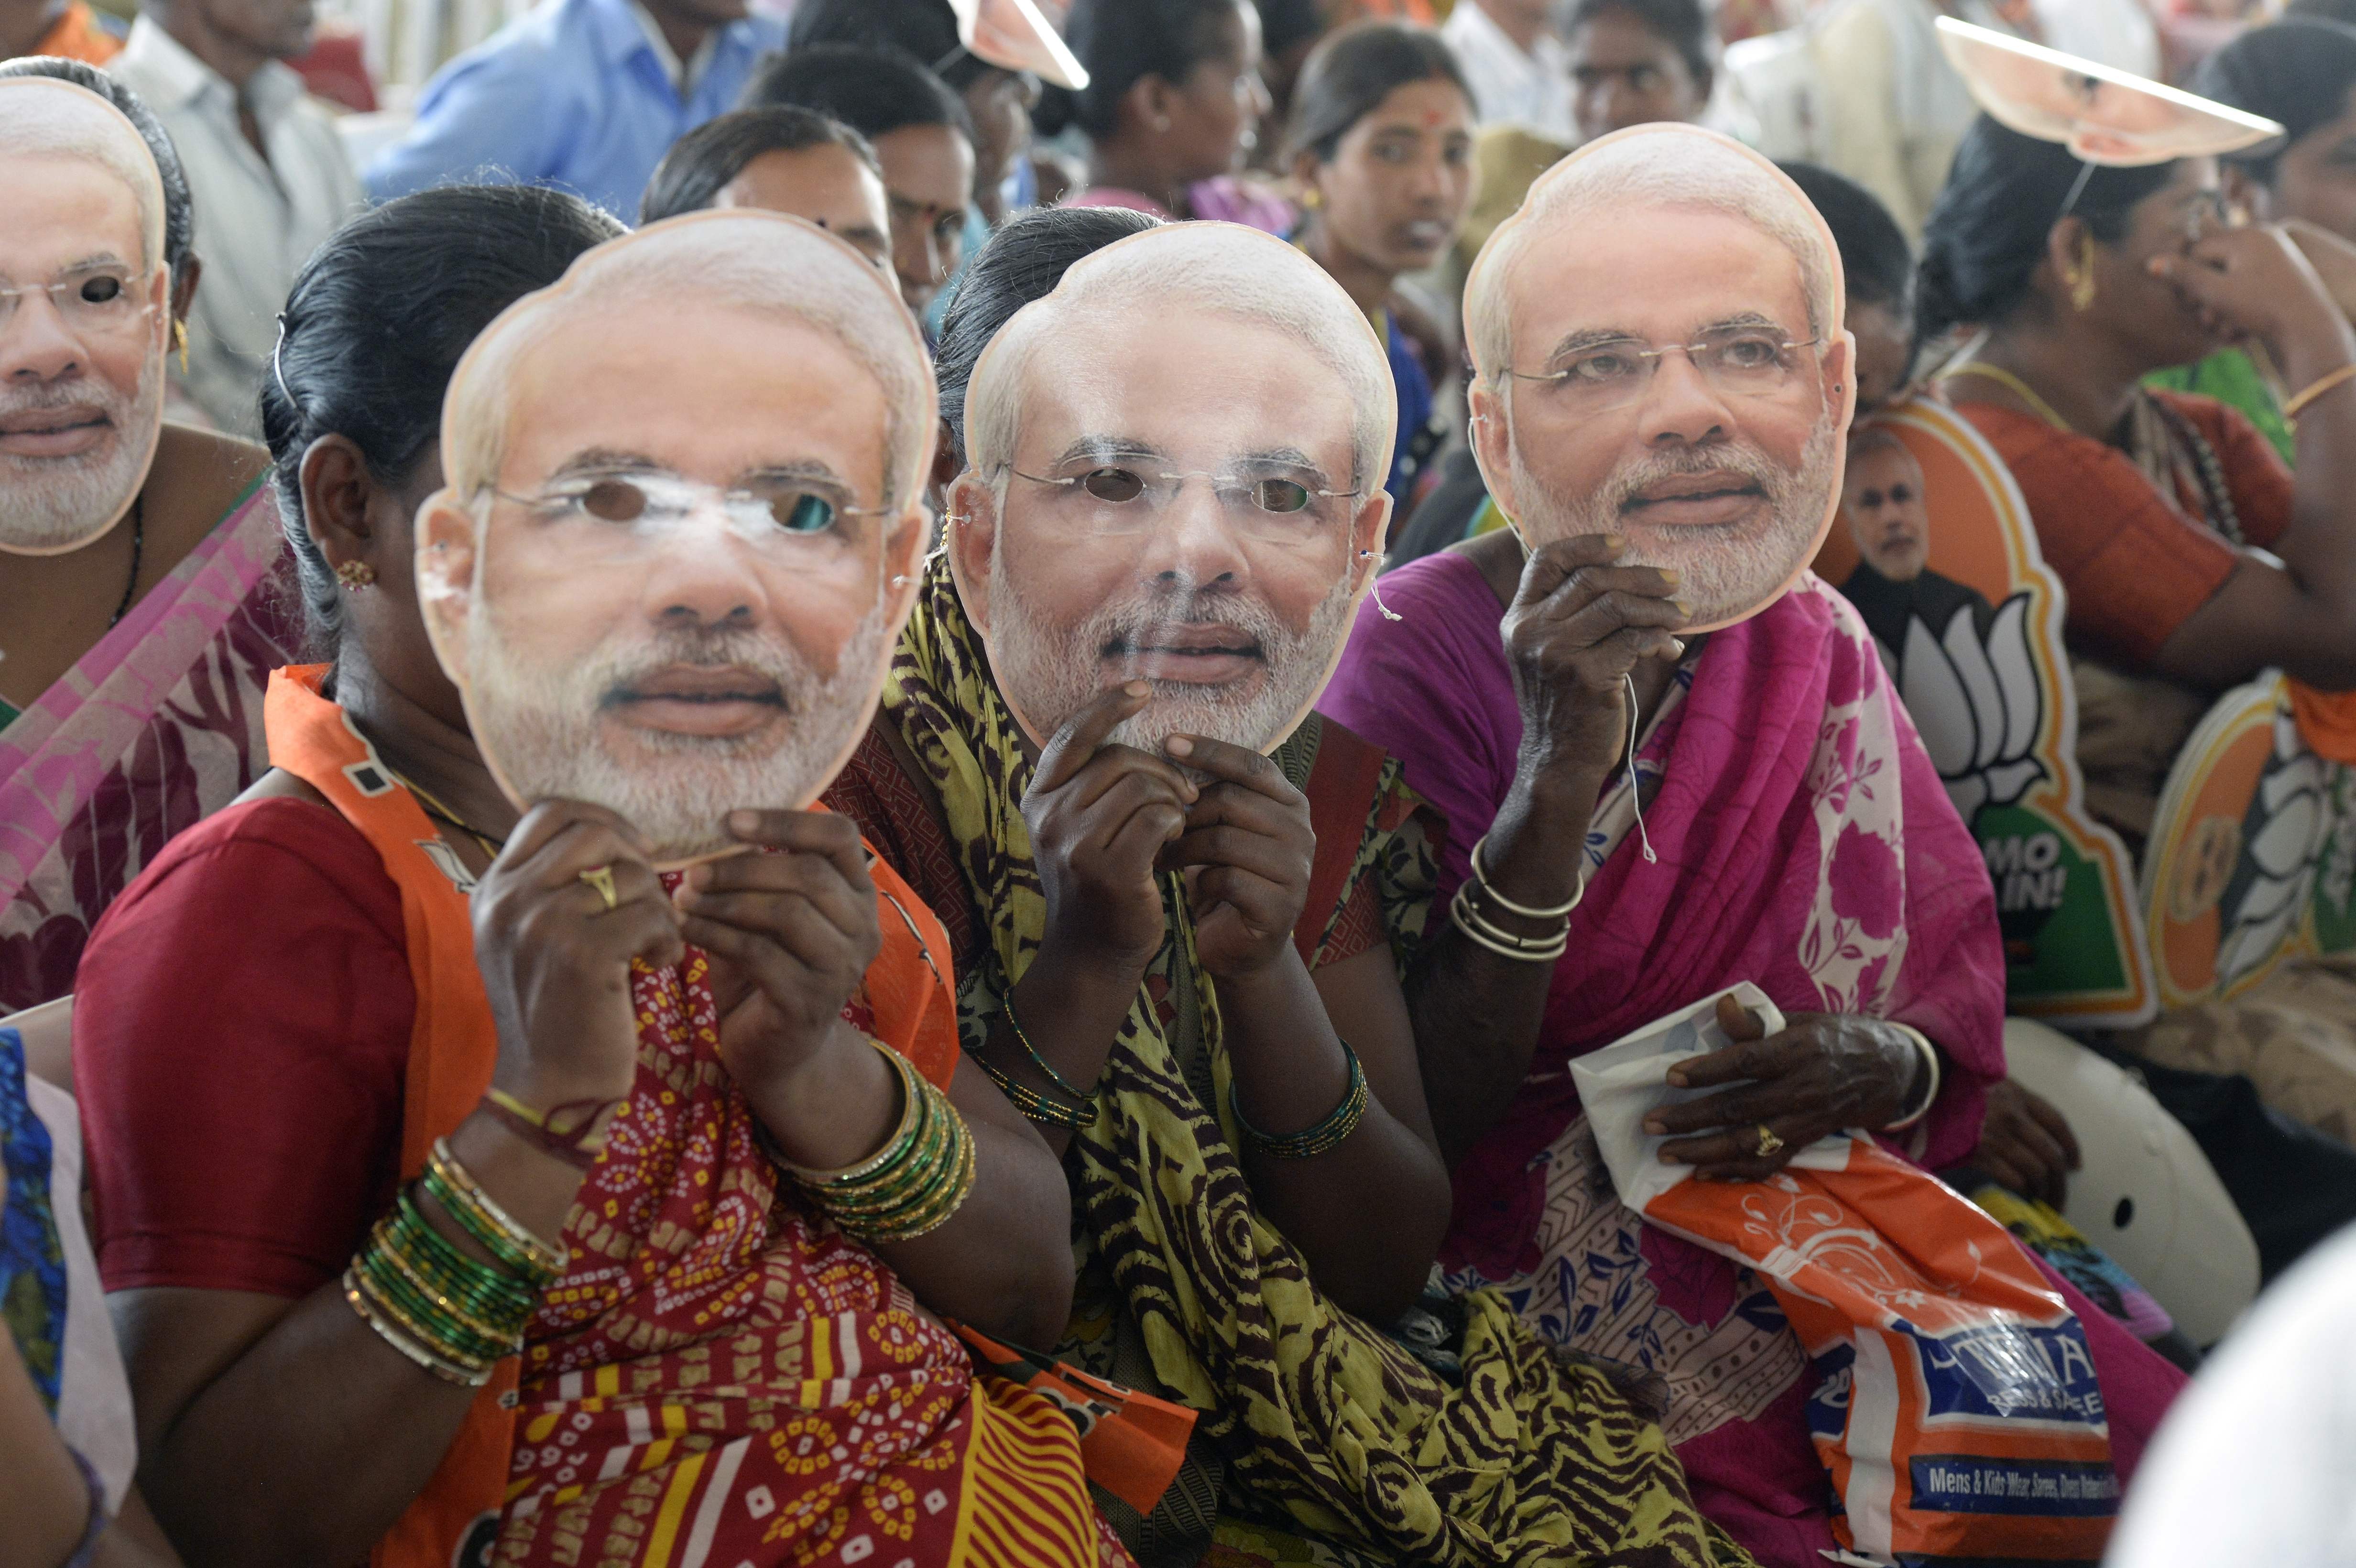 Women supporting the Bharatiya Janata Party wear masks of Prime Minister Narendra Modi at a rally in Hyderabad last month. Photo: AFP